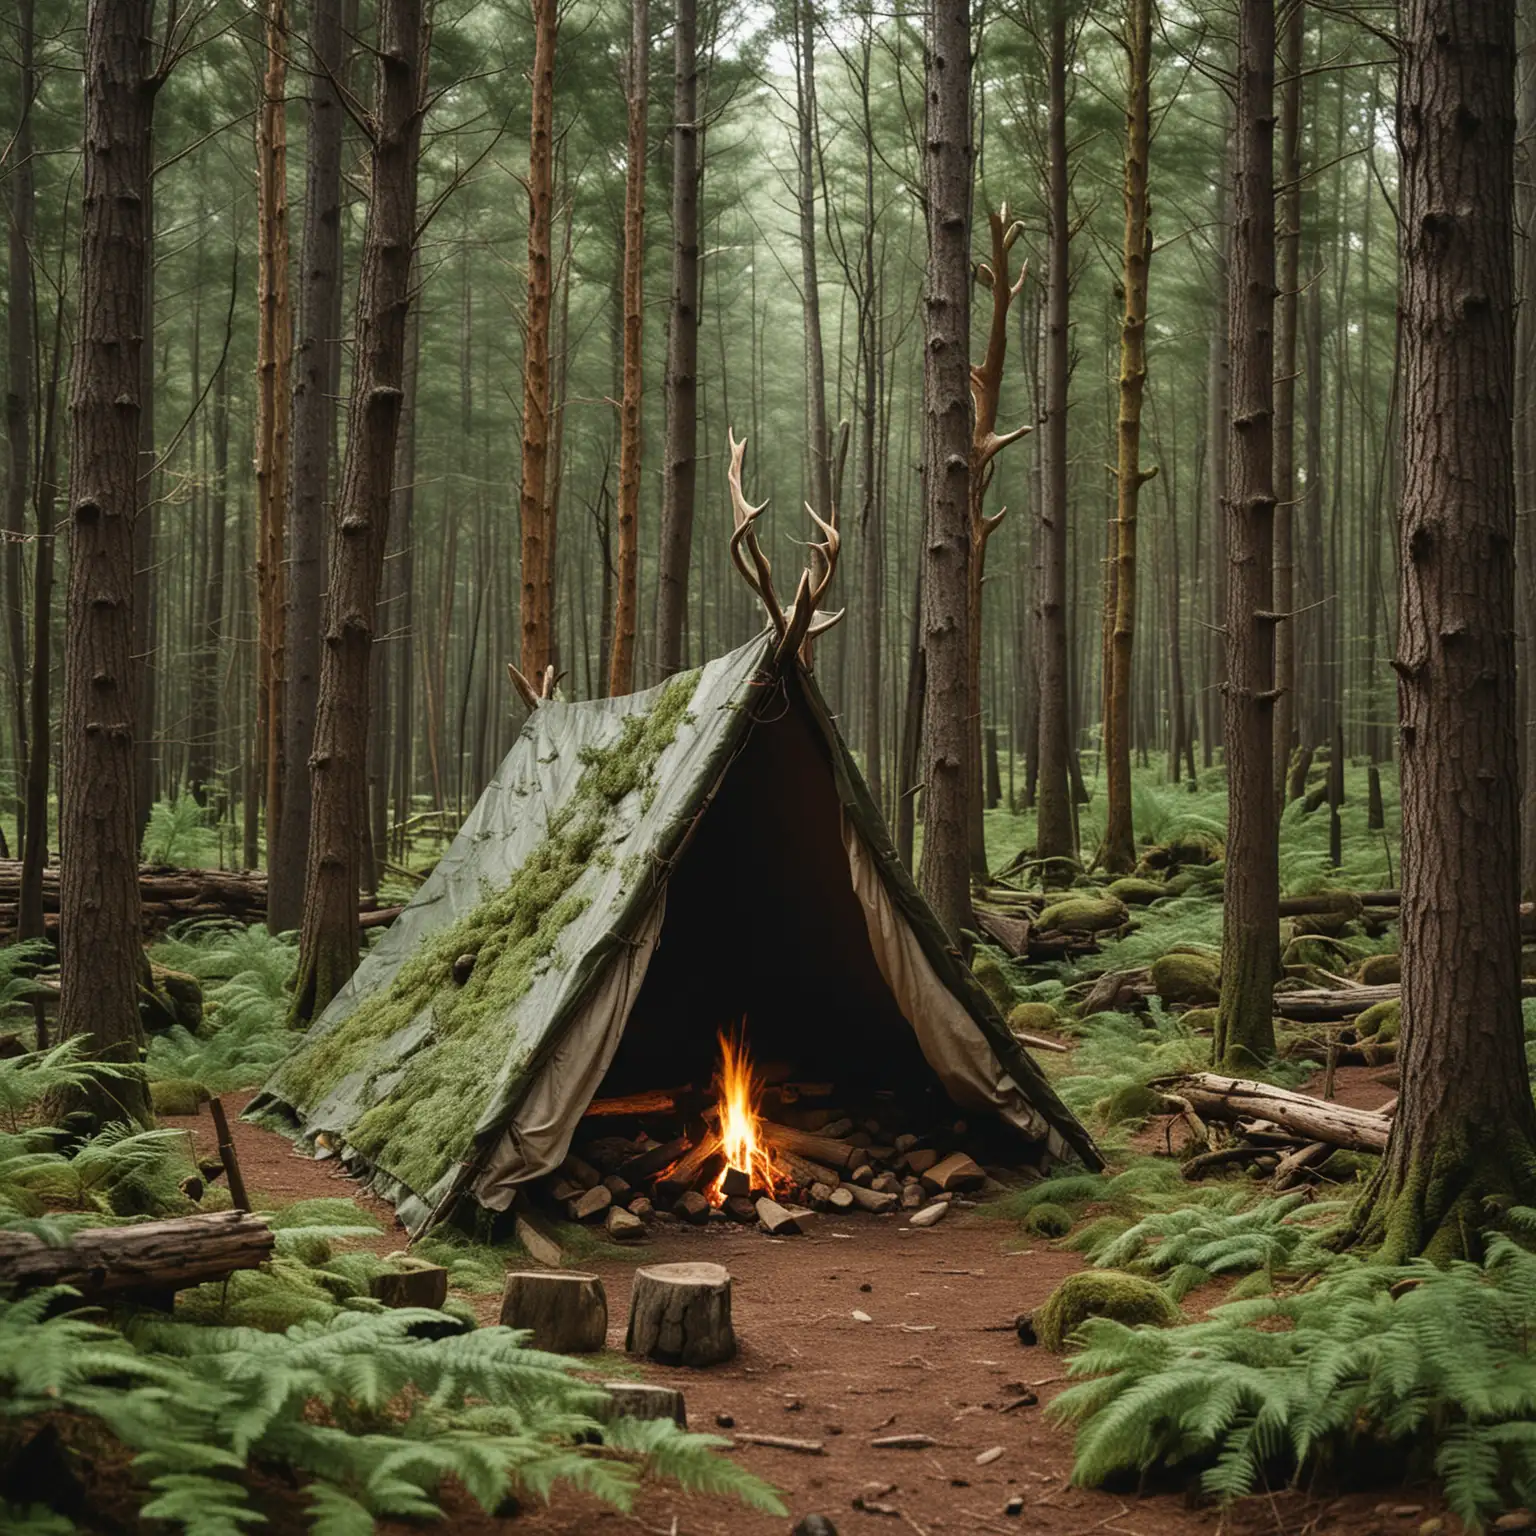 Rustic Camping Retreat Handmade Shelter Amidst Pine Forest